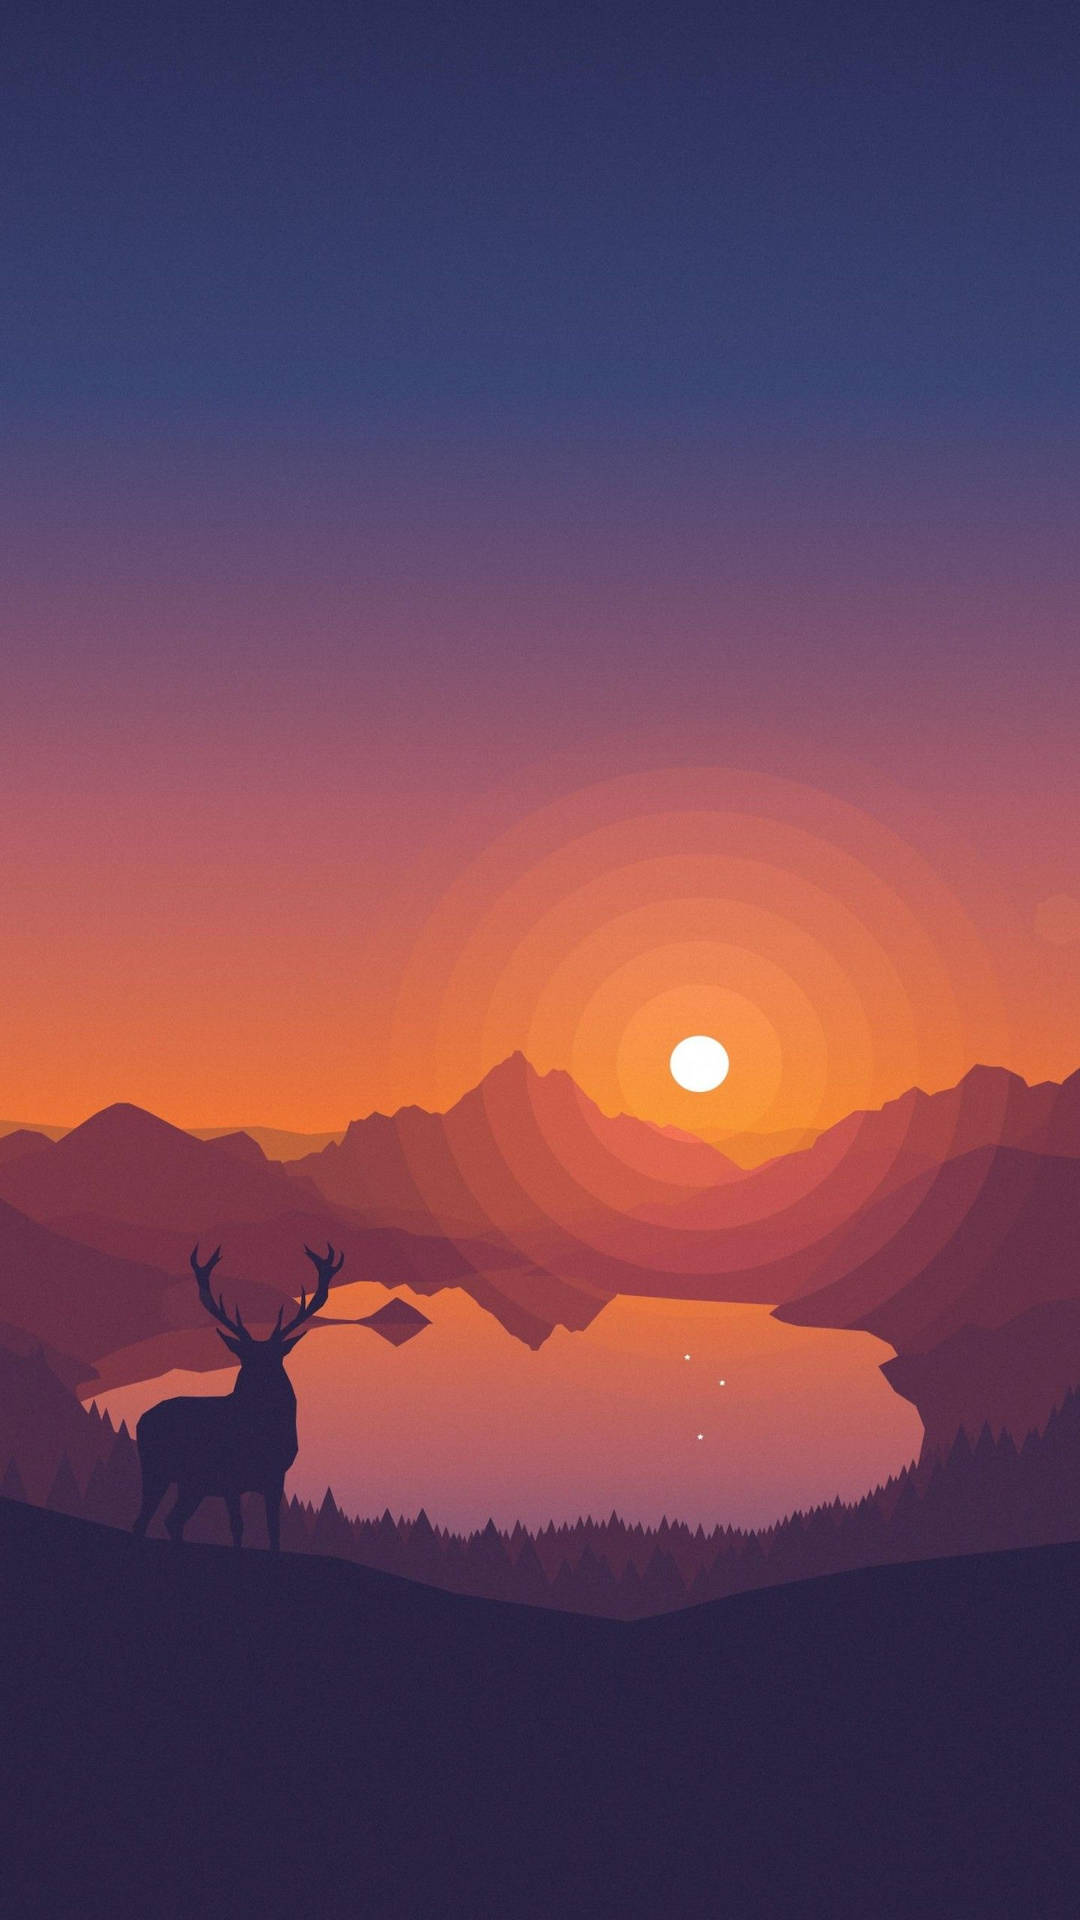 Firewatch Deer And Lake At Sunset Background